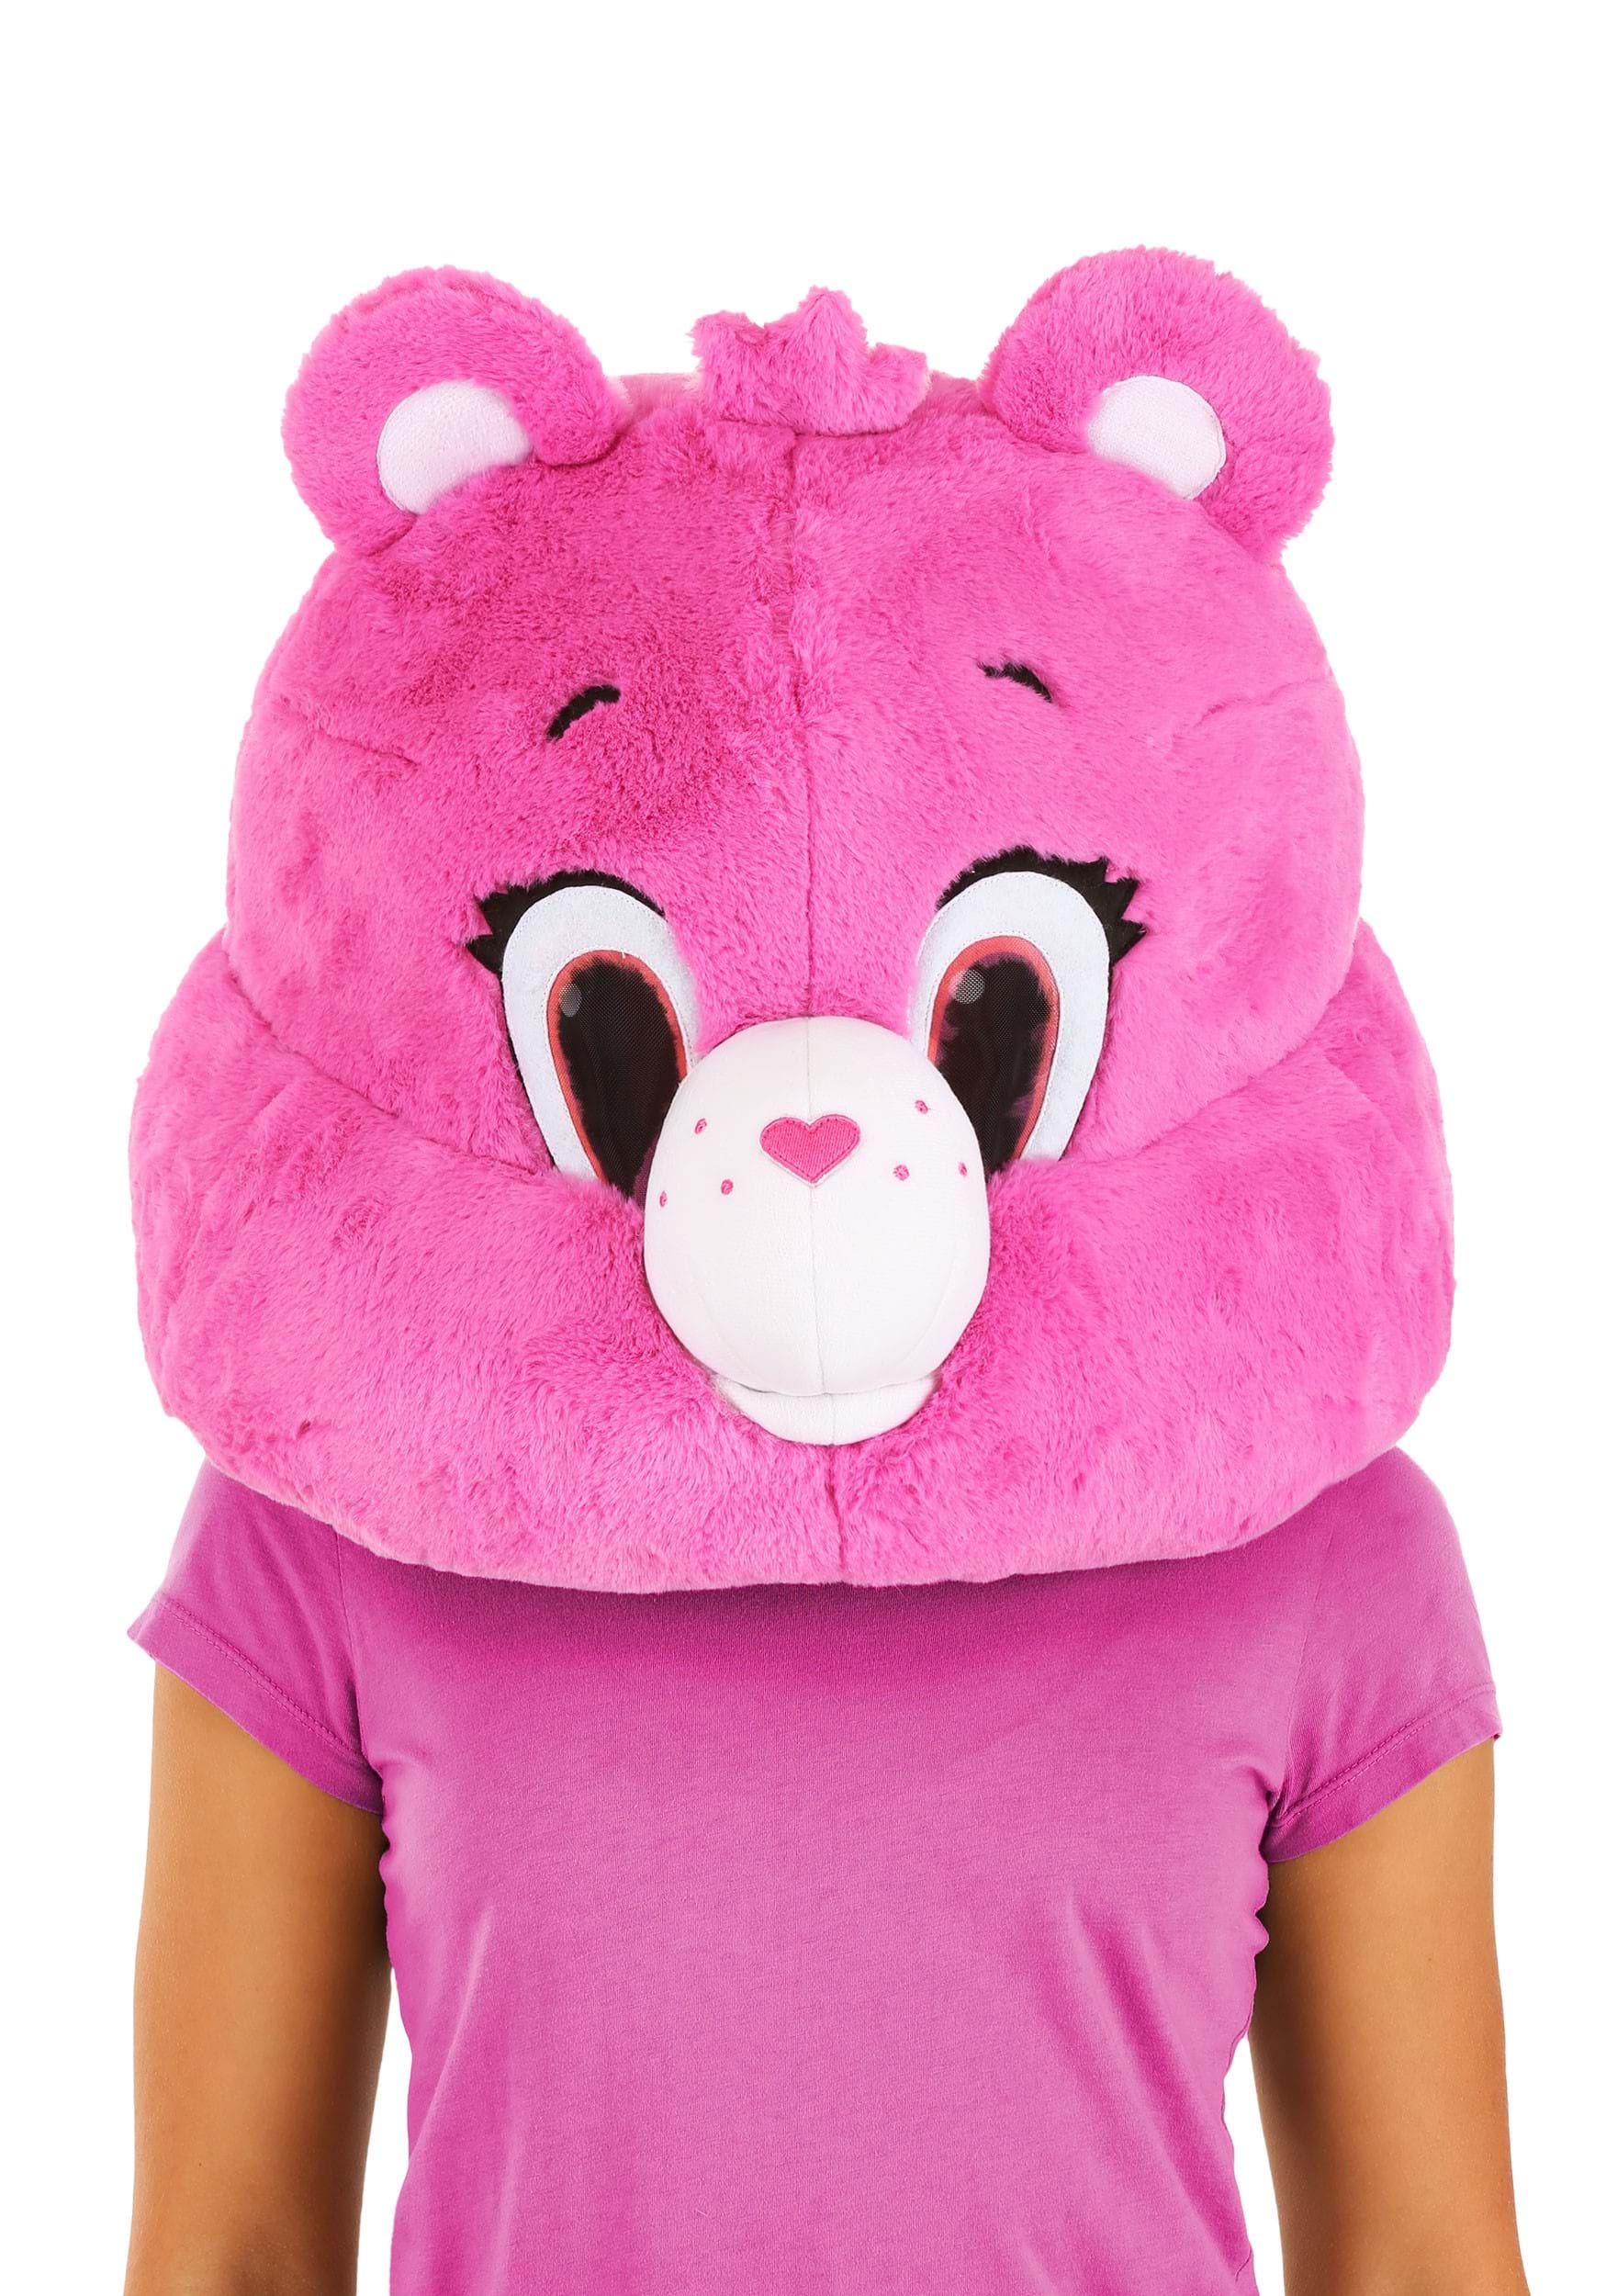 Care Bears Cheer Bear Adult Mascot Mask , Care Bears Accessories